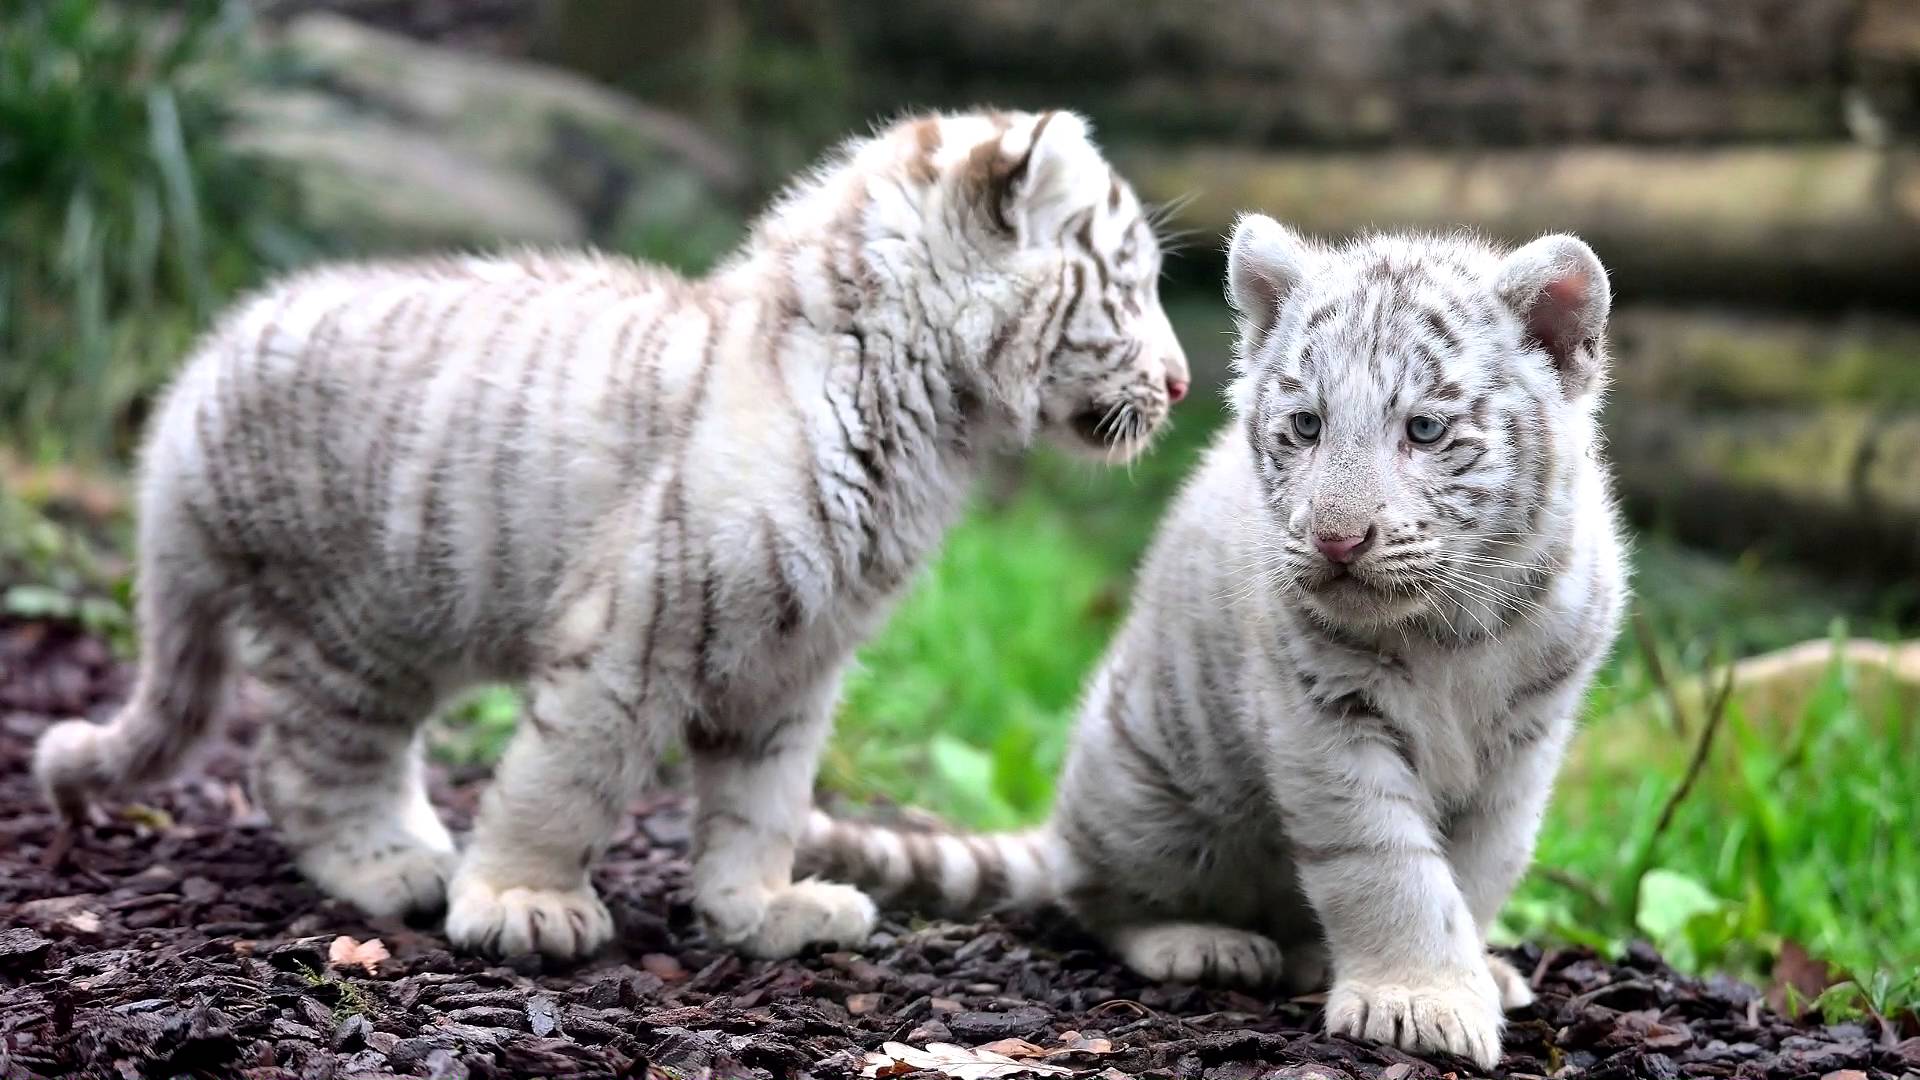 Two white tiger cubs. Bengalese little tiger cubs. Tiger cubs play ...